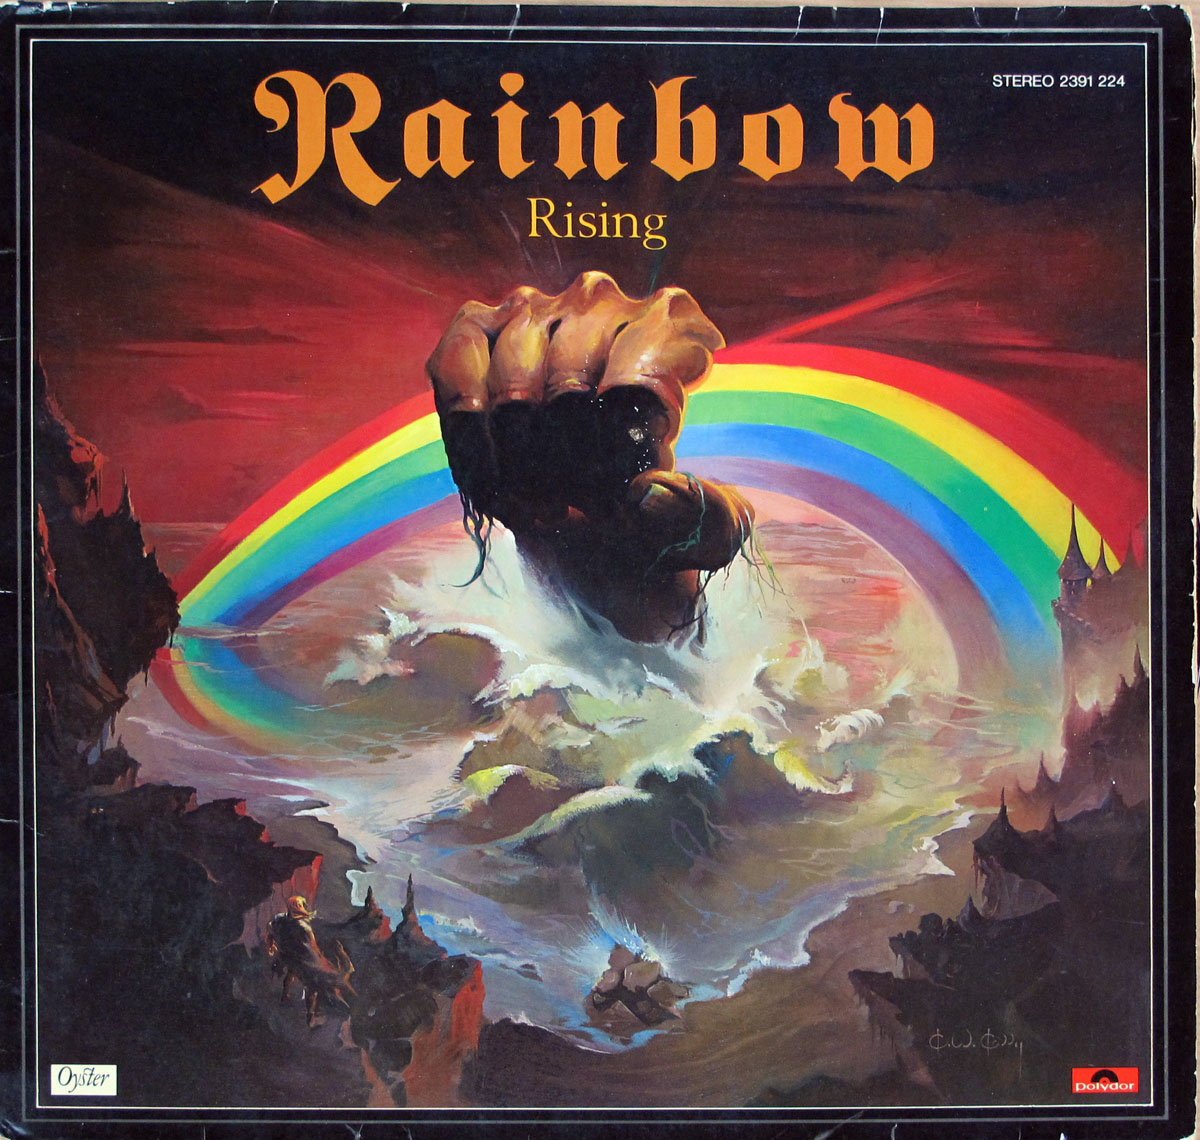 High Resolution Photos of ritchies blackmore rainbow rising germany 